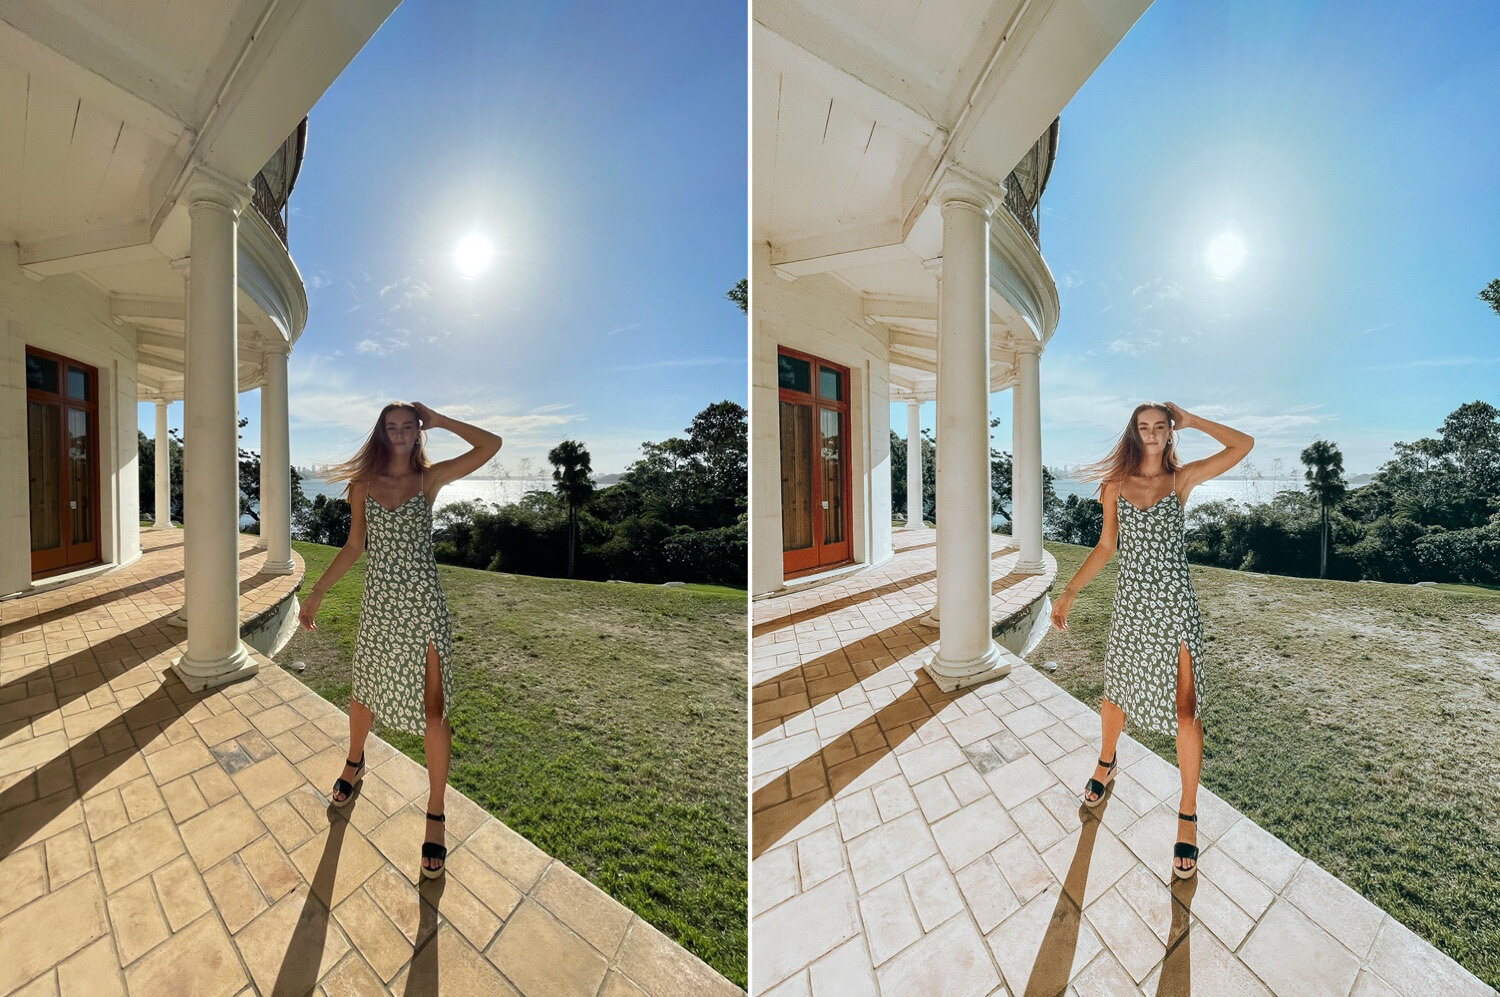  Wide angle camera. Before // After edited with my Digital Film App. 